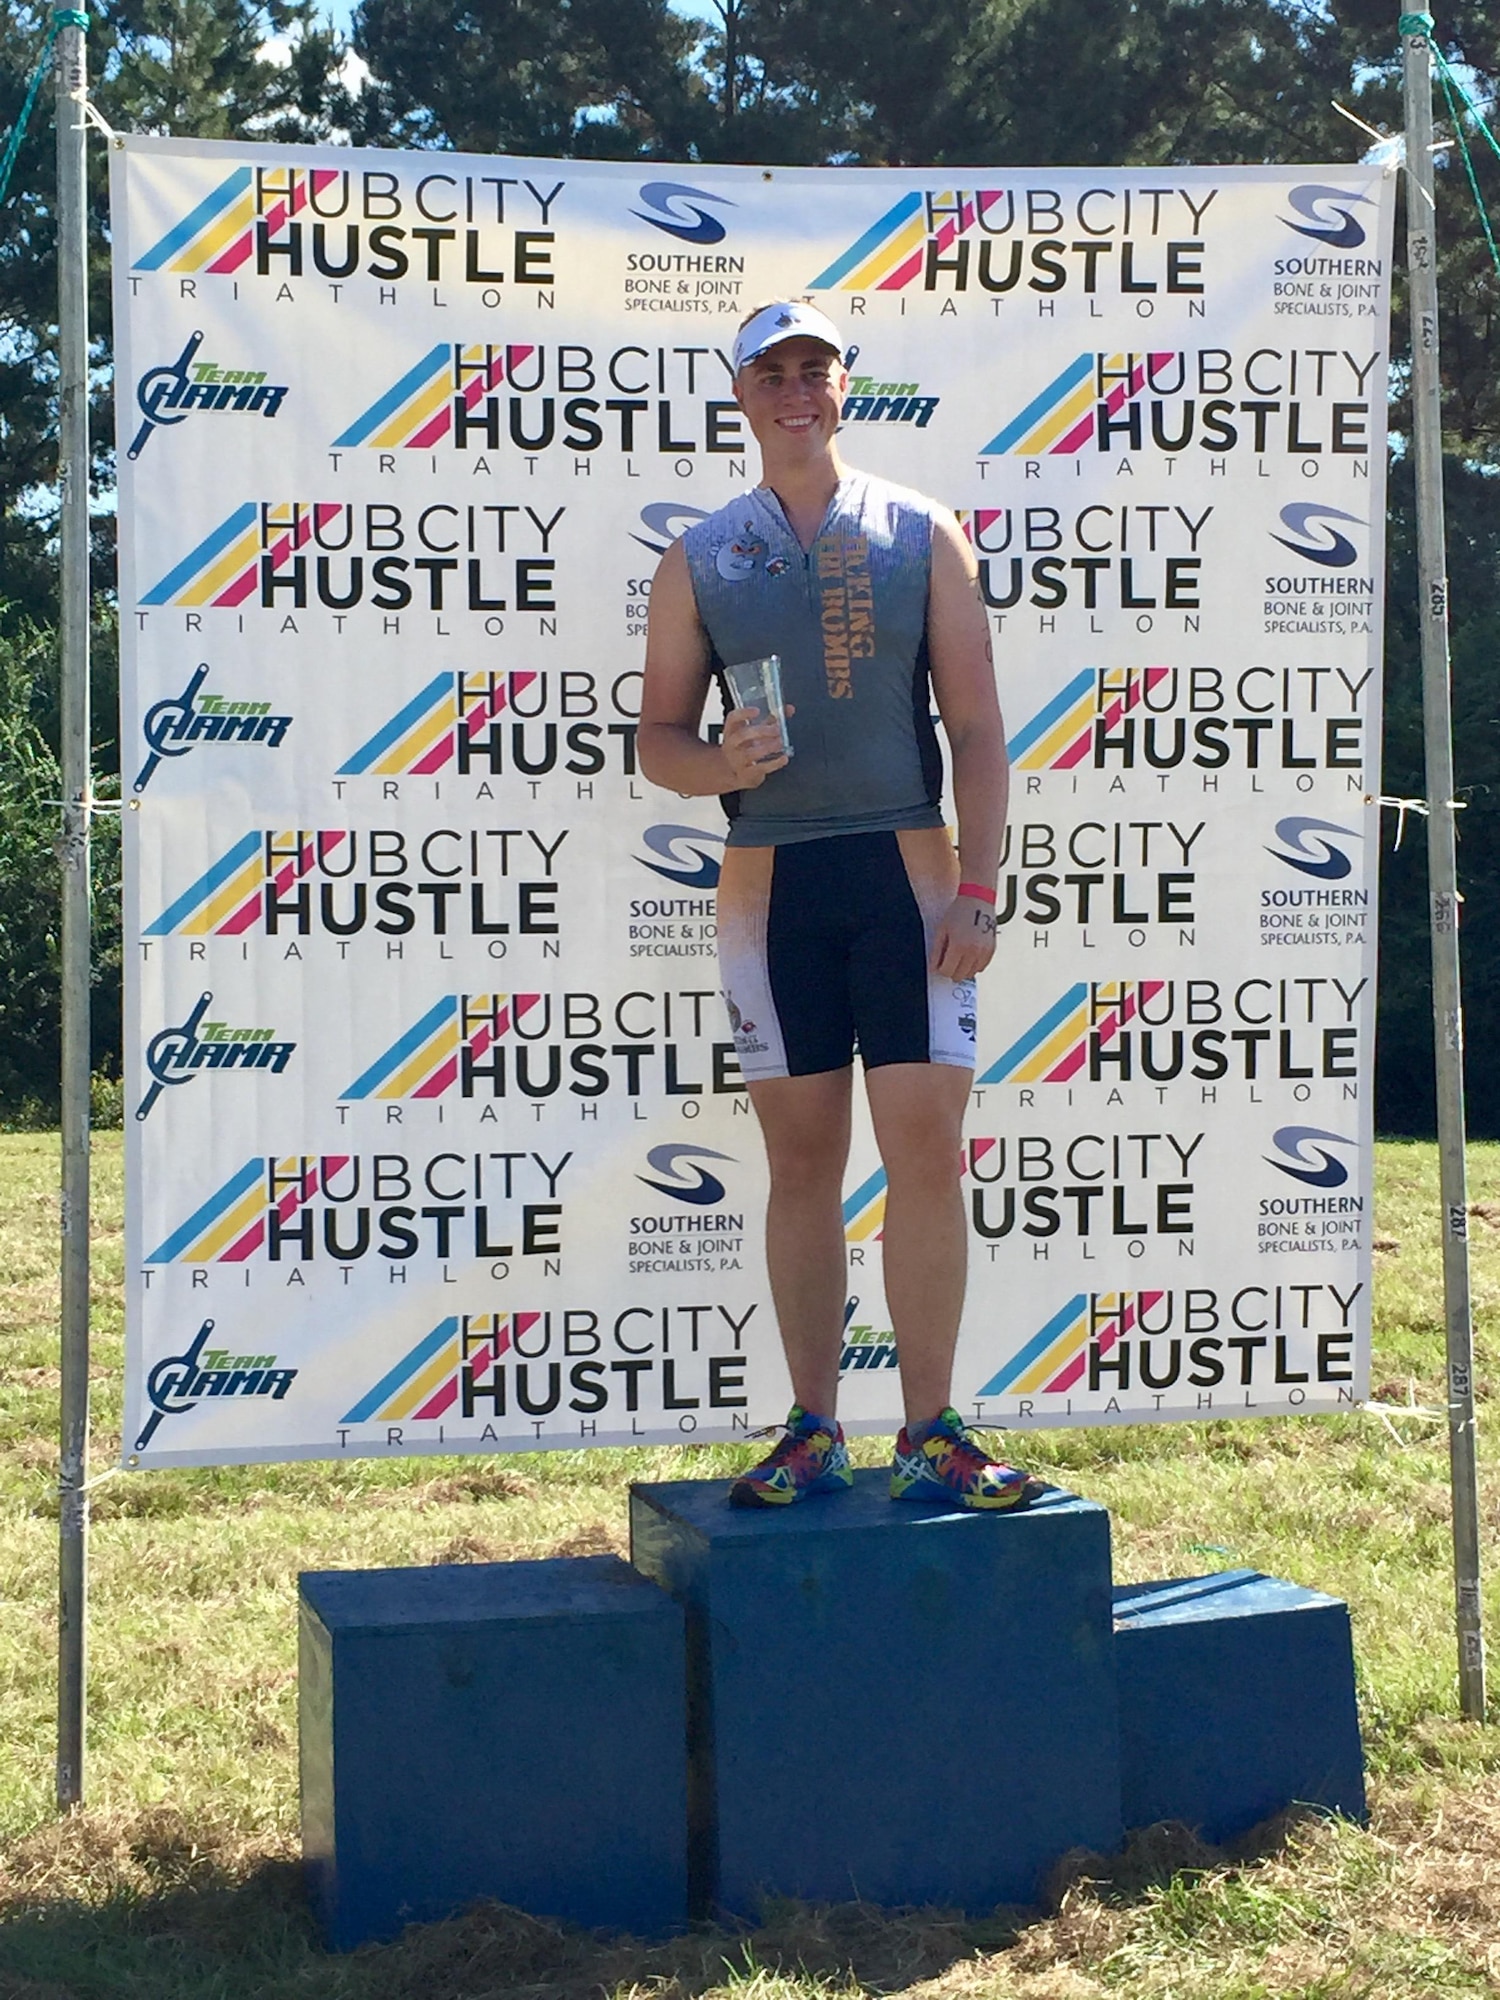 U.S. Air Force Staff Sgt. Jason Parker, 325th Aerospace Medical Squadron medical service craftsman, smiles after completing the Hub City Hustle Triathlon hosted in Hattiesburg, Miss., Oct. 8, 2014. Parker won the military division of the triathlon. He has run in triathlons for three years and has discovered a correlation with the difficulty of the activity and accomplishing things in his personal and professional life. (Courtesy photo)